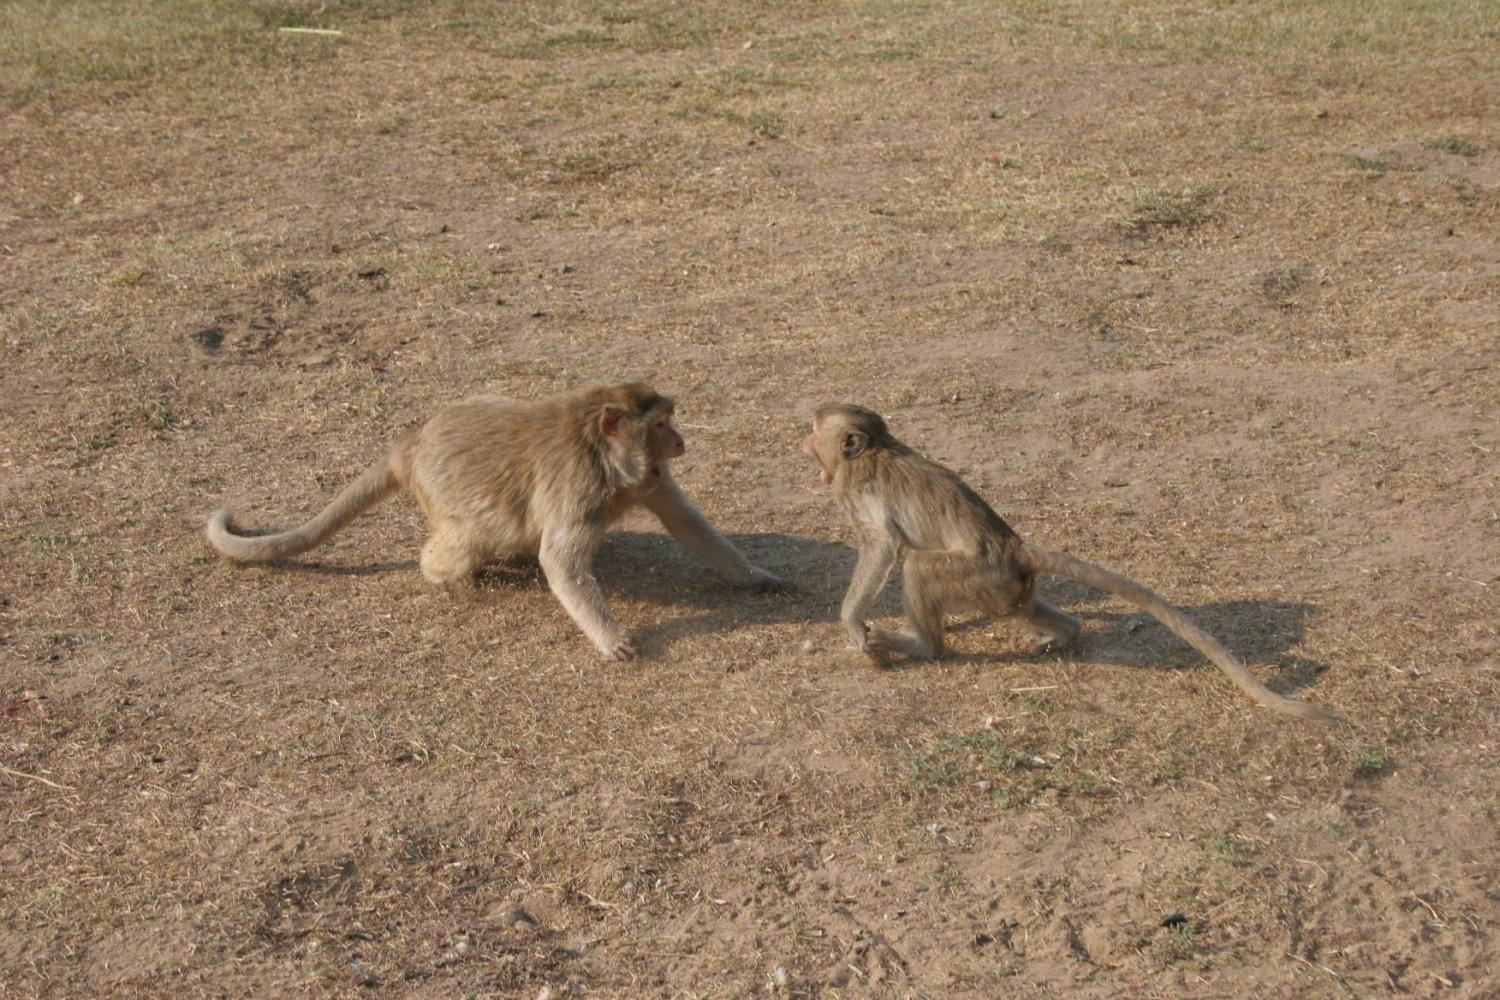 Two macaques crouching before an aggressive encounter. Both are maintaining eye contact.